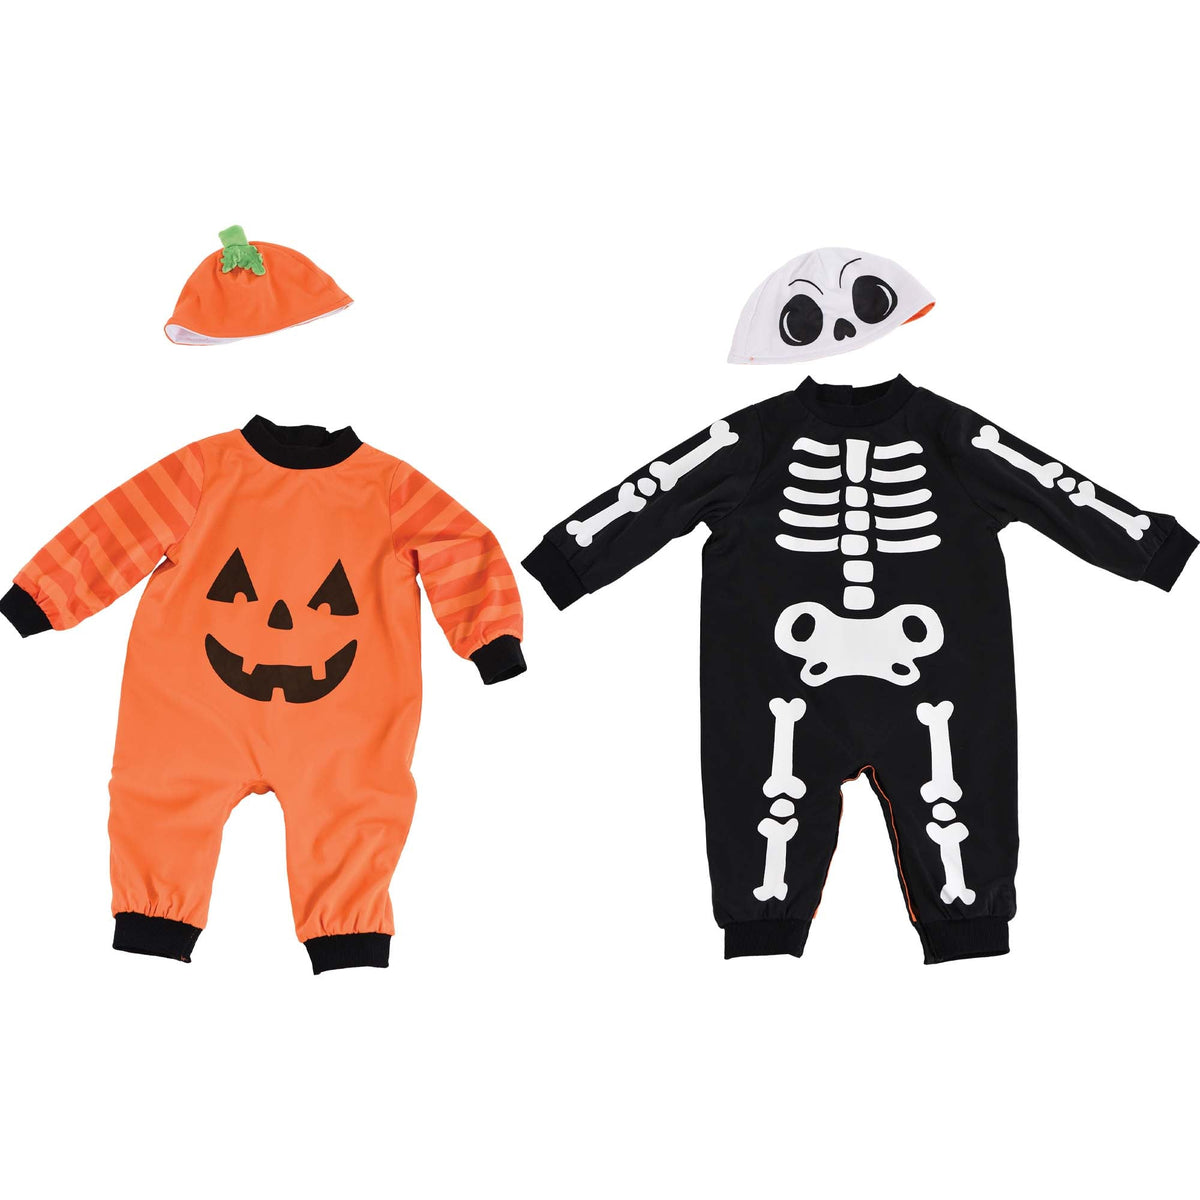 HALLOWEEN COSTUME CO. Costumes Pumpkin and Skeleton Reversible Costume for Babies